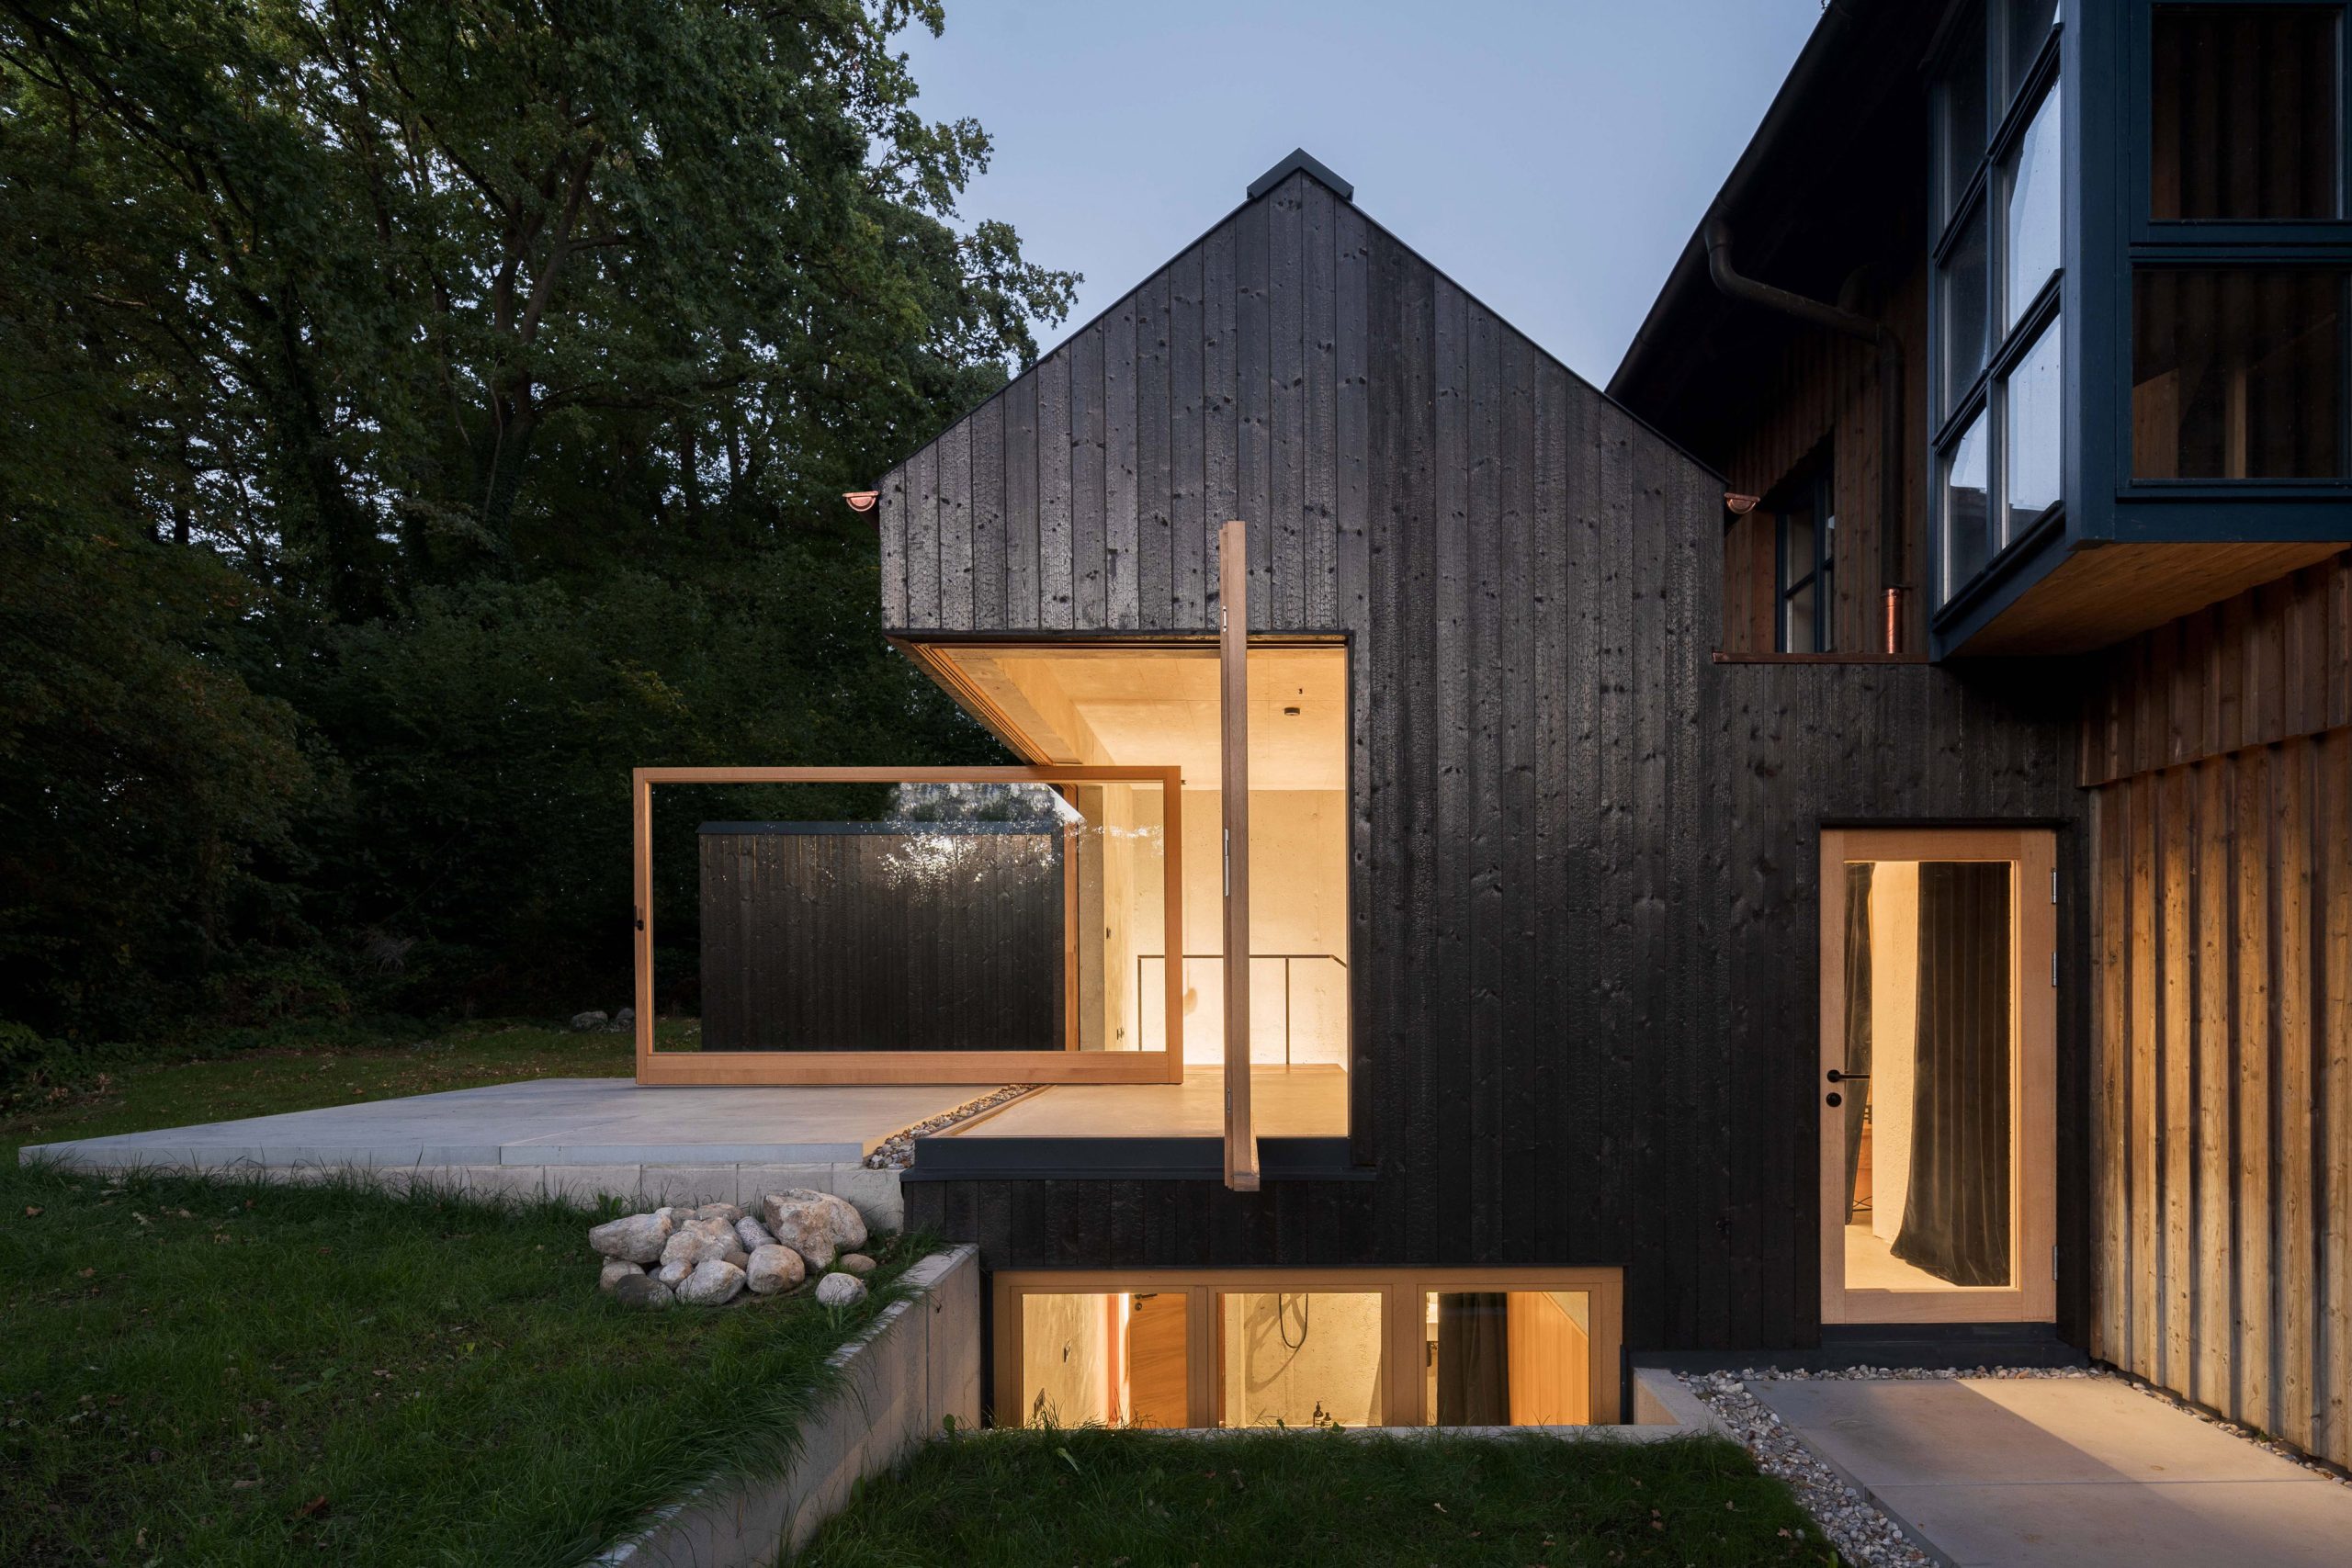 Gira Brings Style and Substance to a Little Black House